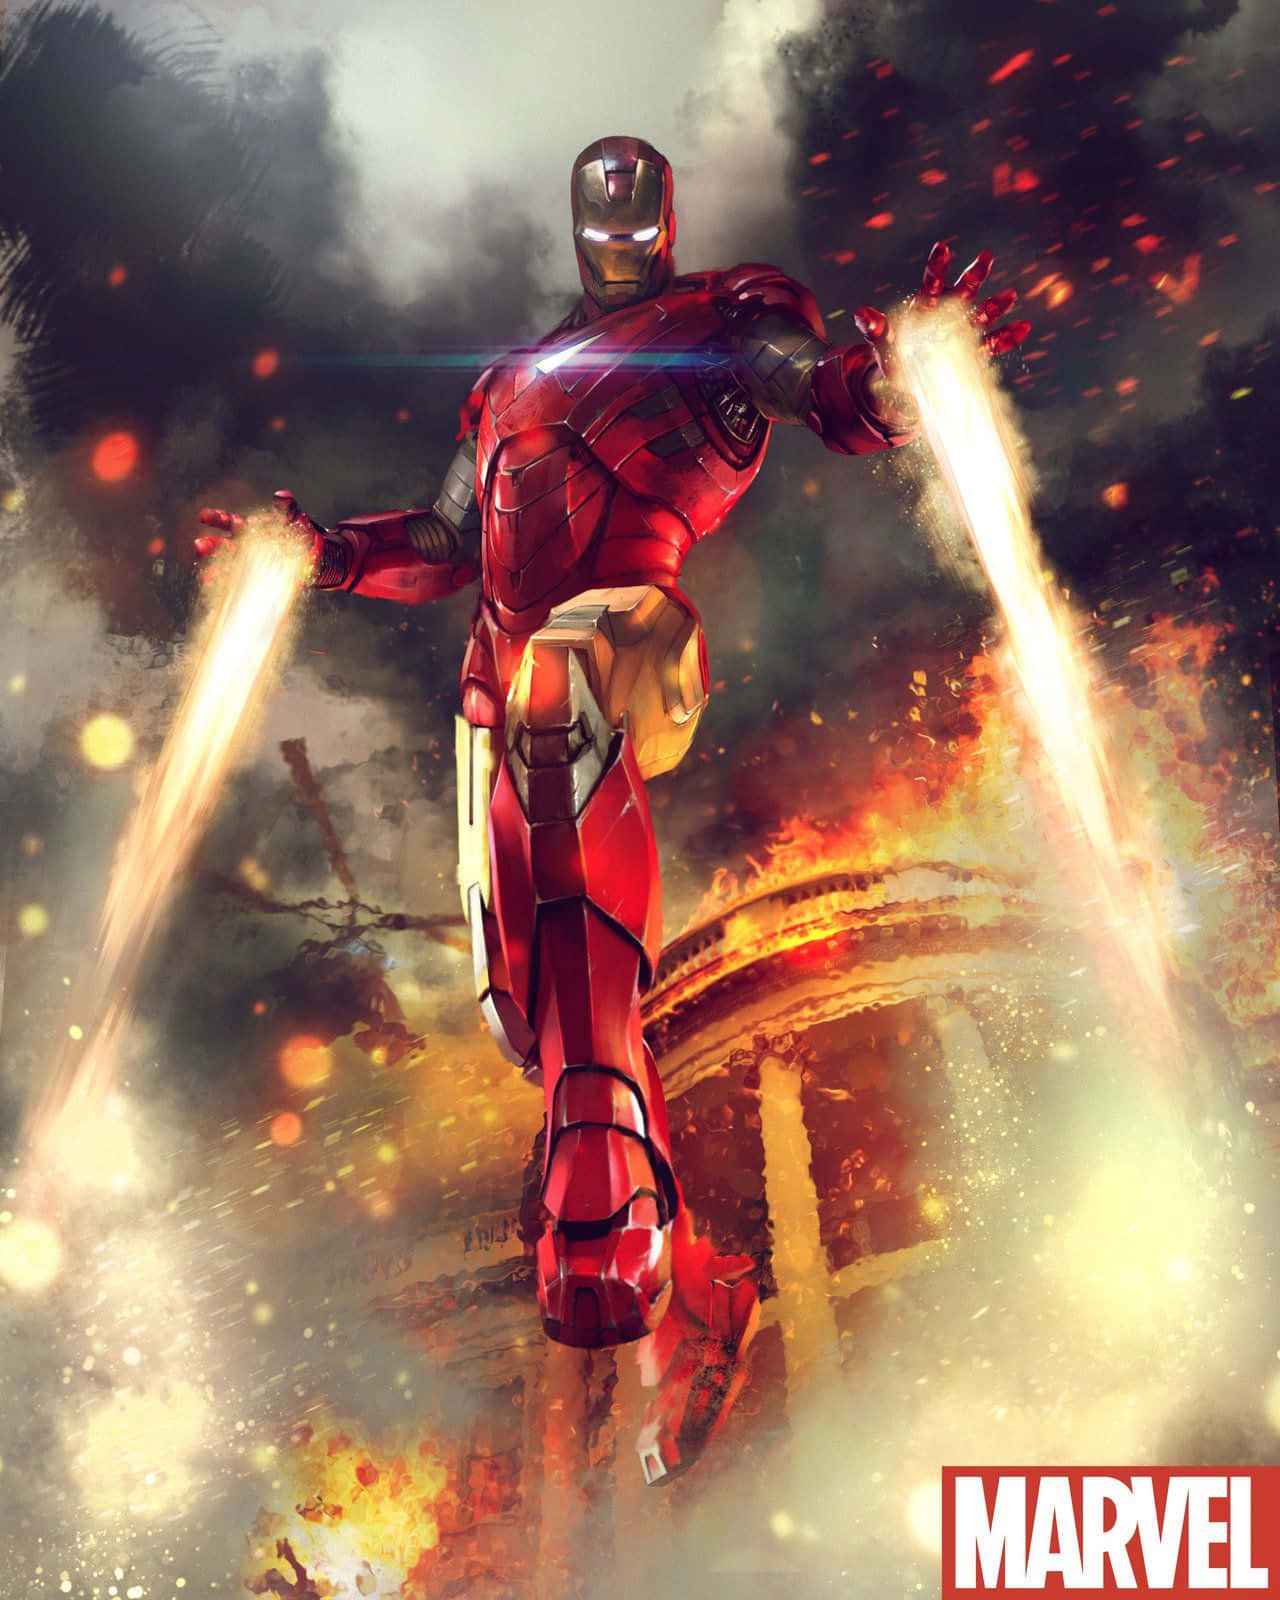 Get ready for a wild ride with our incredible Iron Man fan art! Wallpaper